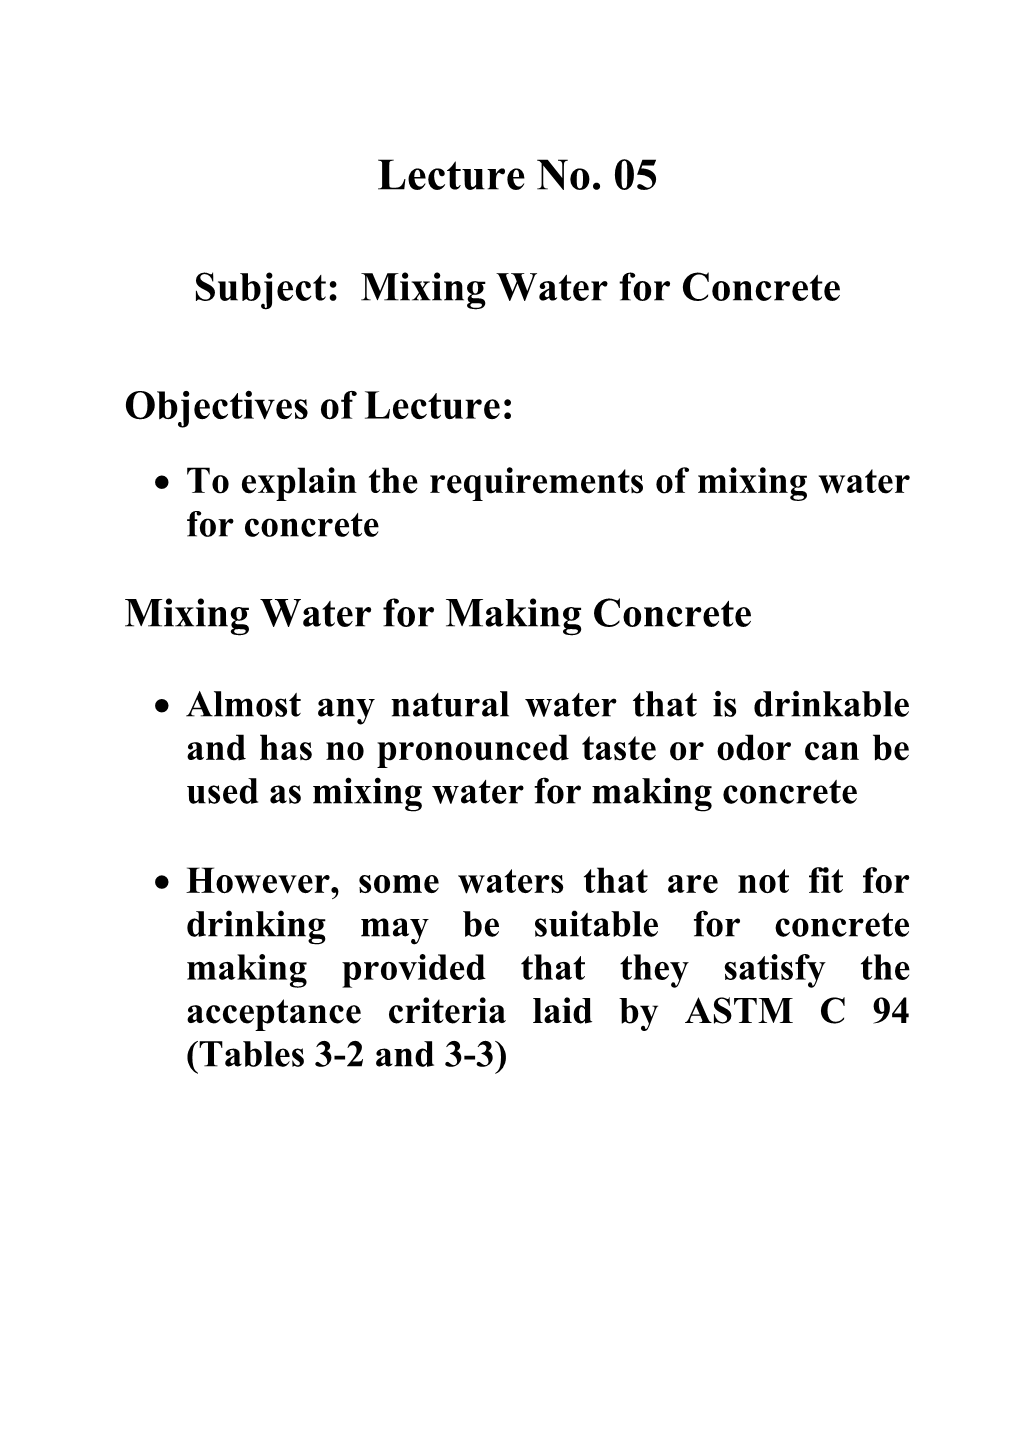 Subject: Mixing Water for Concrete